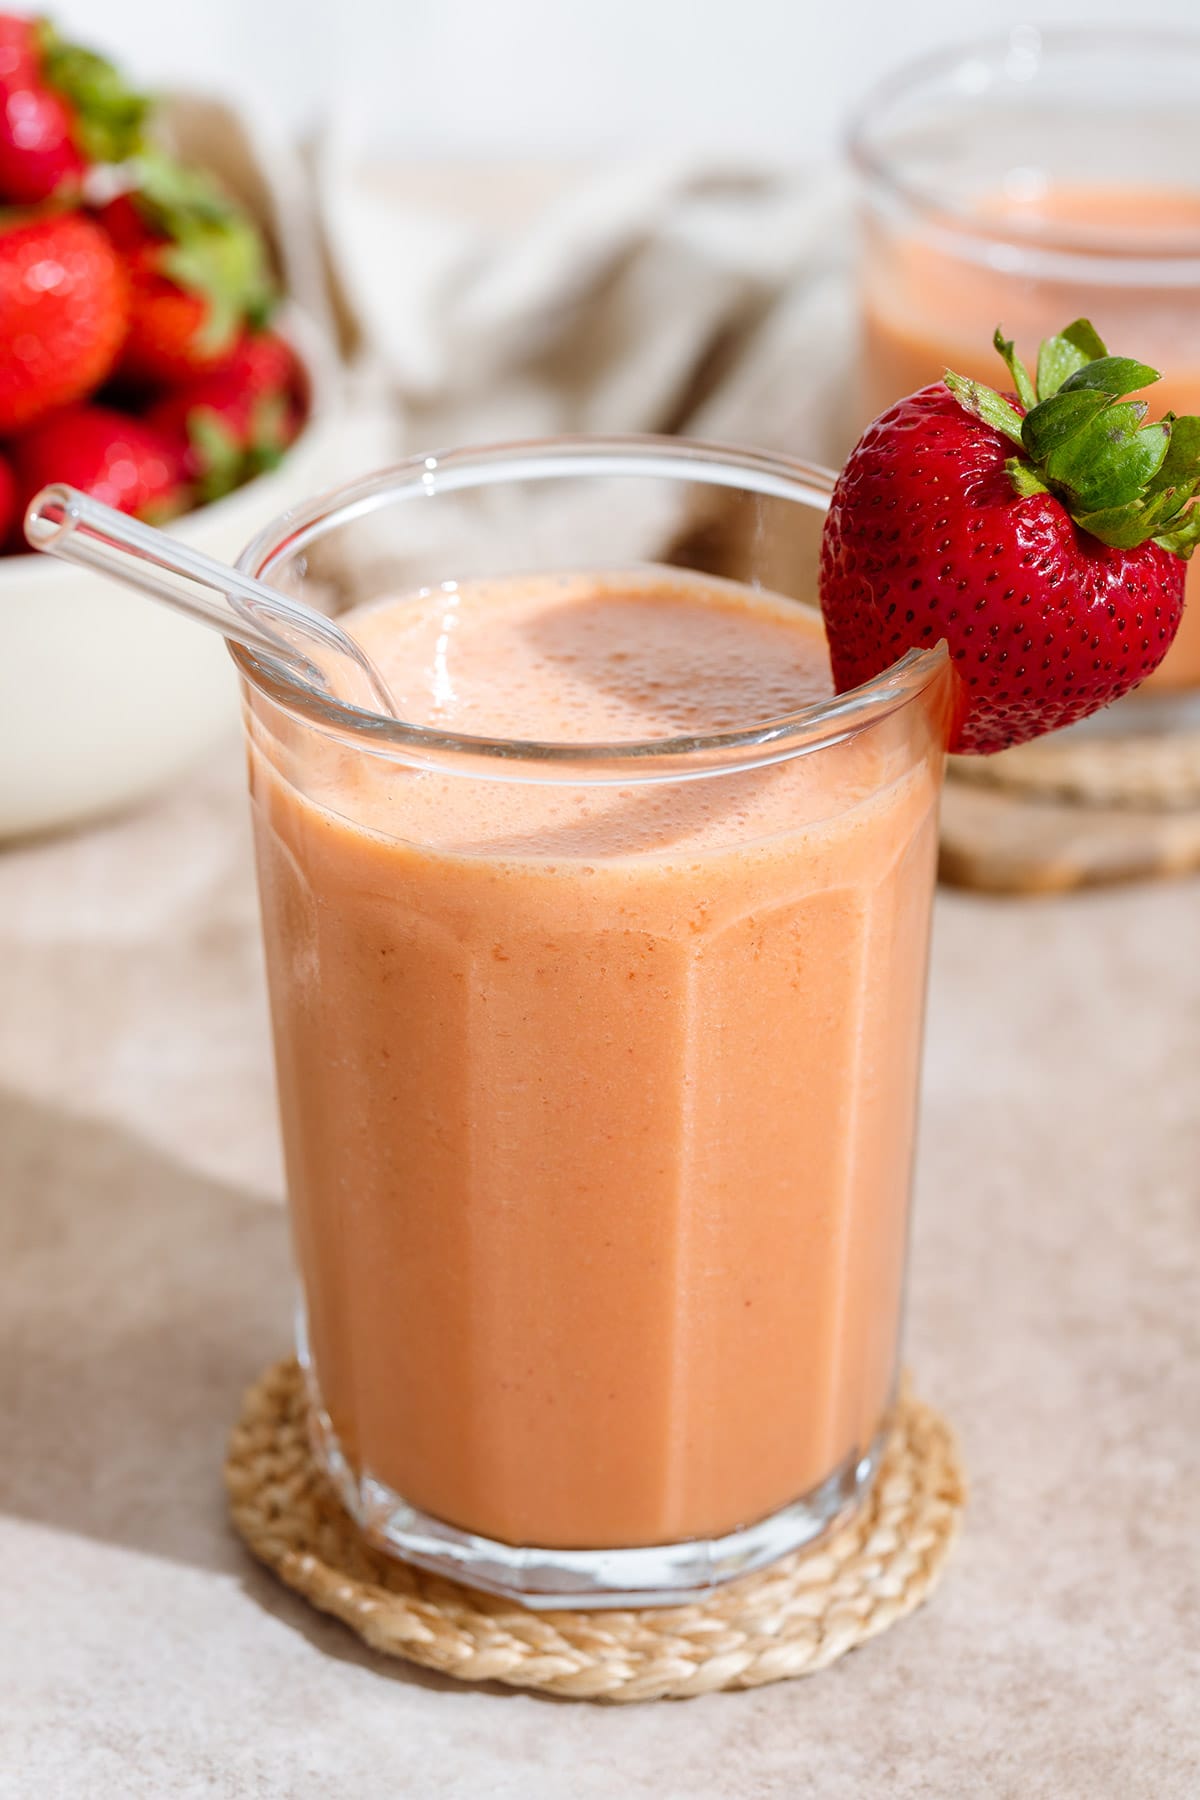 Peach colored smoothie in a tall glass with a glass straw and garnished with a fresh strawberry on the rim and more strawberries around it.